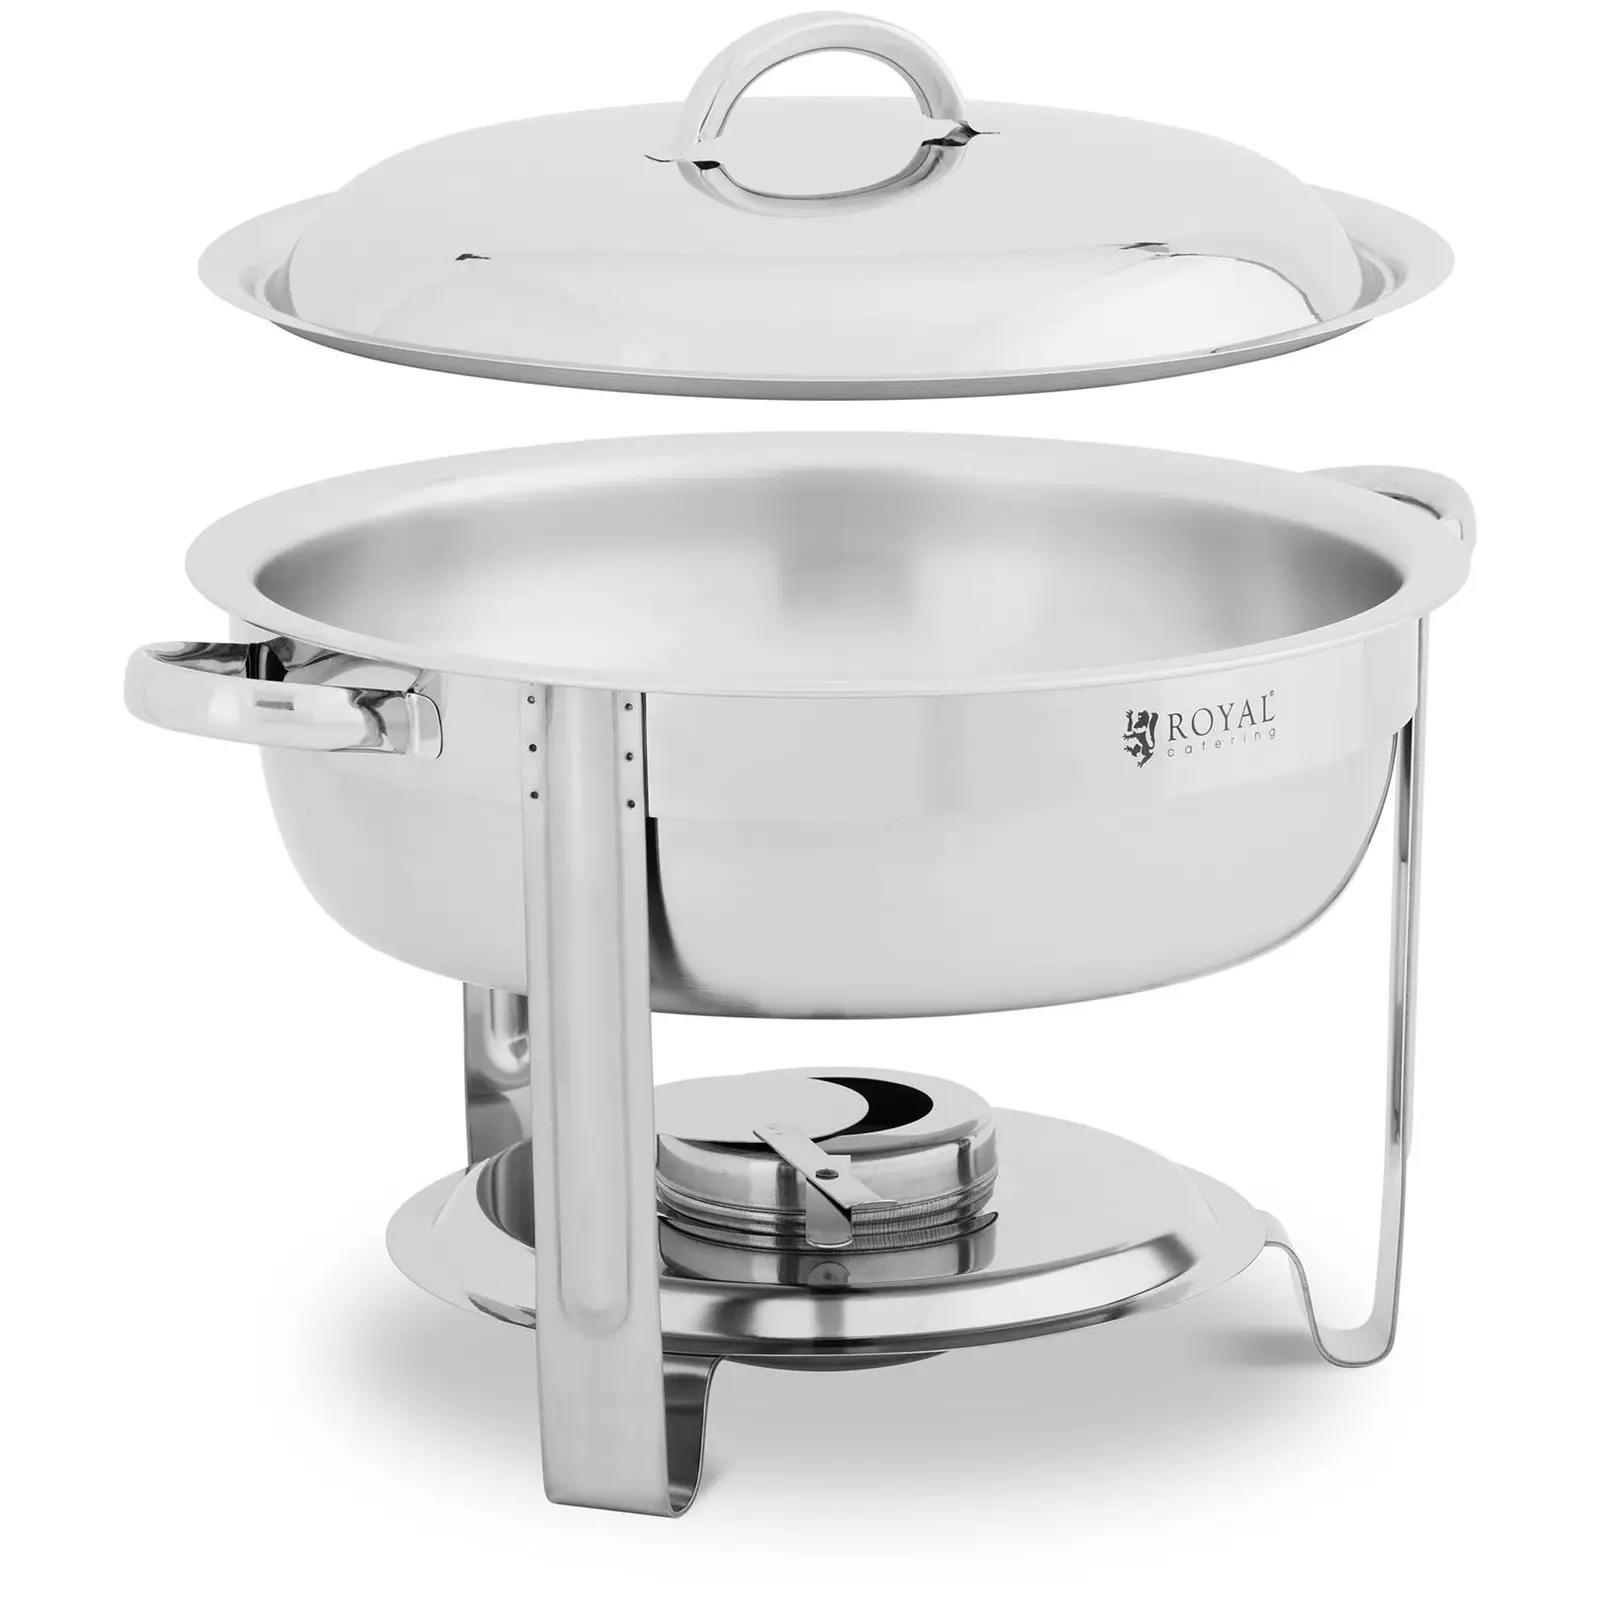 Chafing Dish - round - 3.5 L - Royal Catering